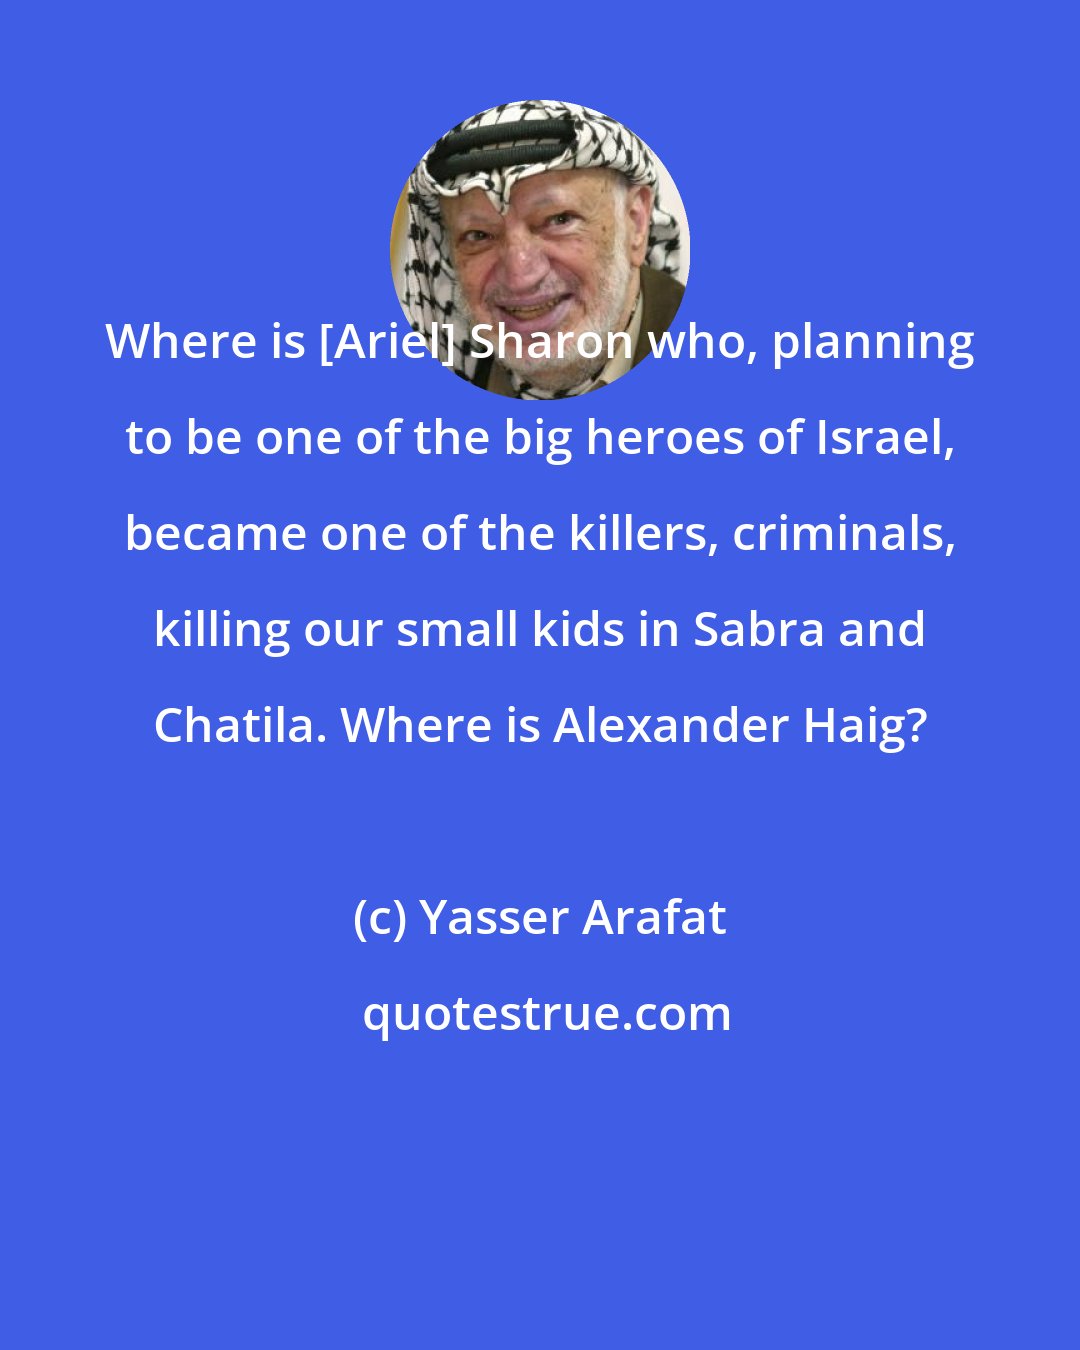 Yasser Arafat: Where is [Ariel] Sharon who, planning to be one of the big heroes of Israel, became one of the killers, criminals, killing our small kids in Sabra and Chatila. Where is Alexander Haig?